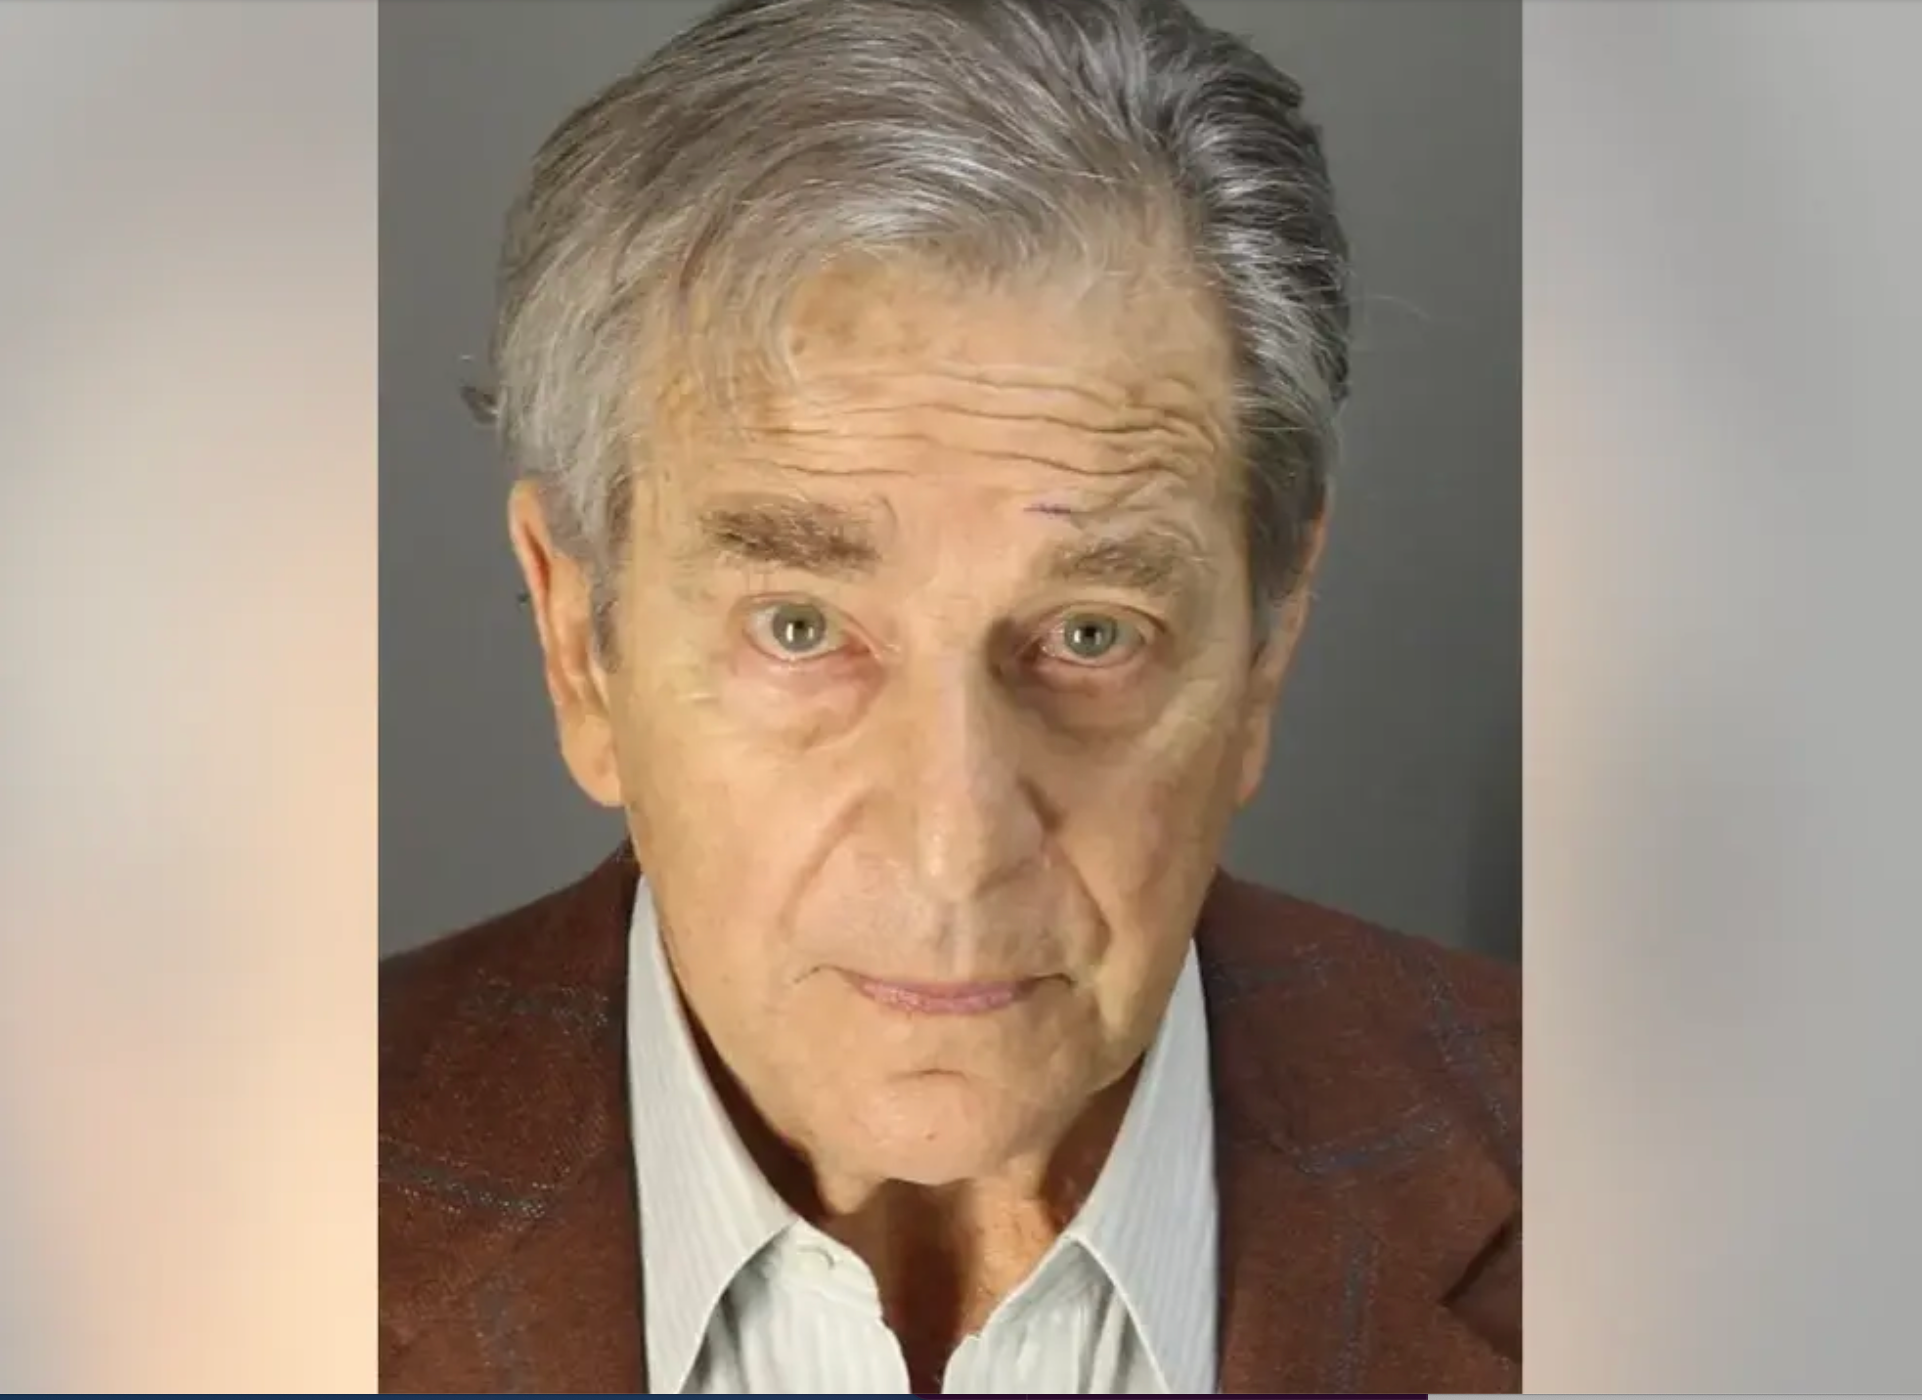 Booking photo shows Paul Pelosi after he was booked for DUI on 29 May 2022